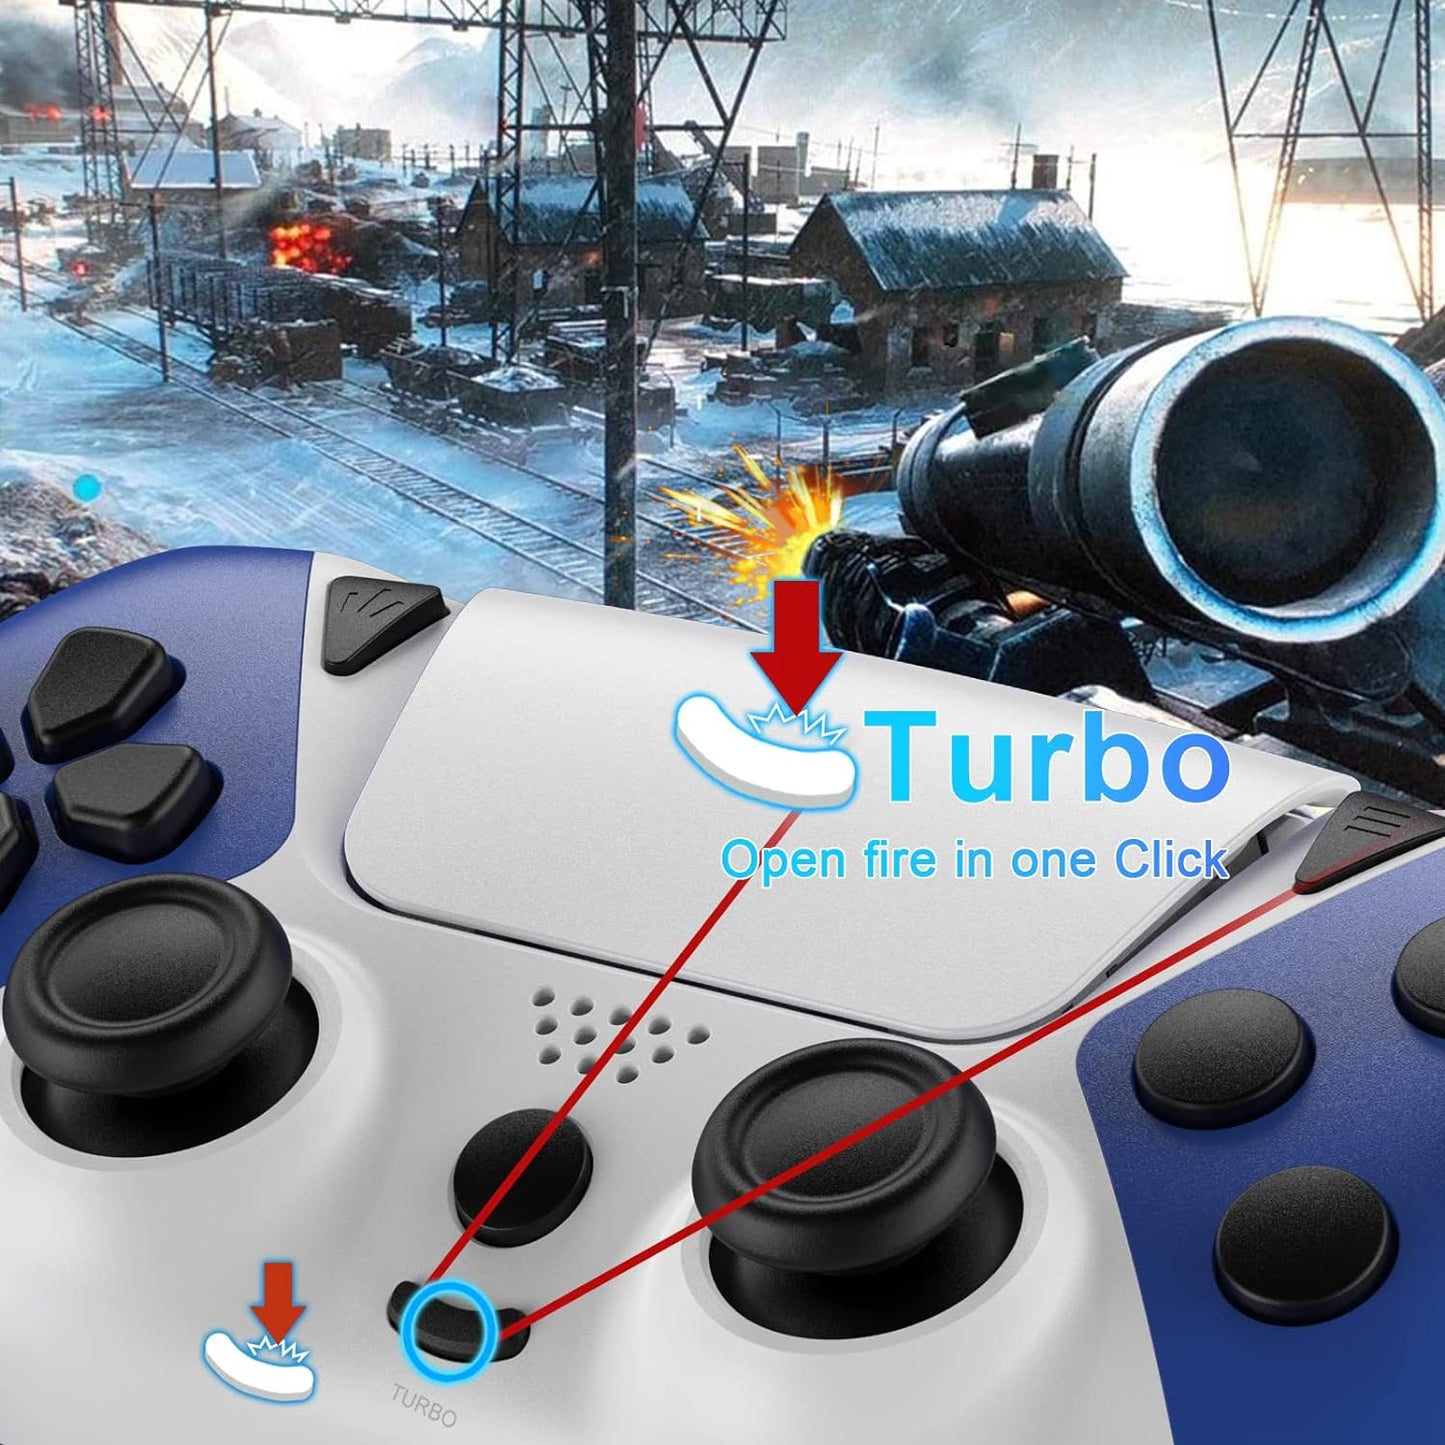 UGAME Wireless Controller for PS4 Controller, Ymir PS4 Remote for Playstation 4 with Turbo, Steam Gamepad Work with Back Button